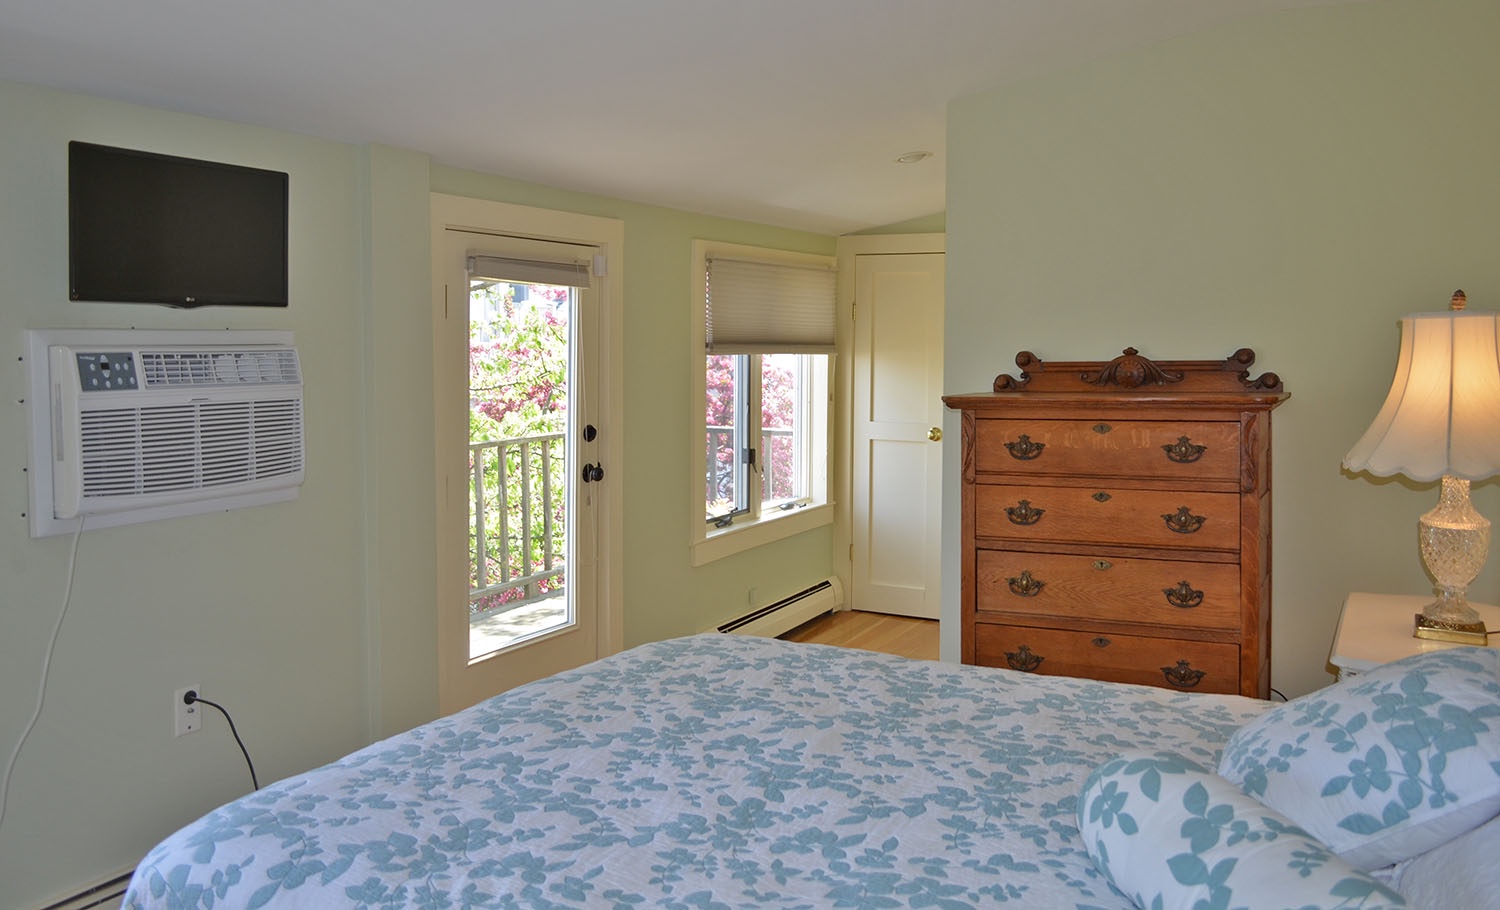 The Main bedroom has Queen bed, an AC unit, and balcony.